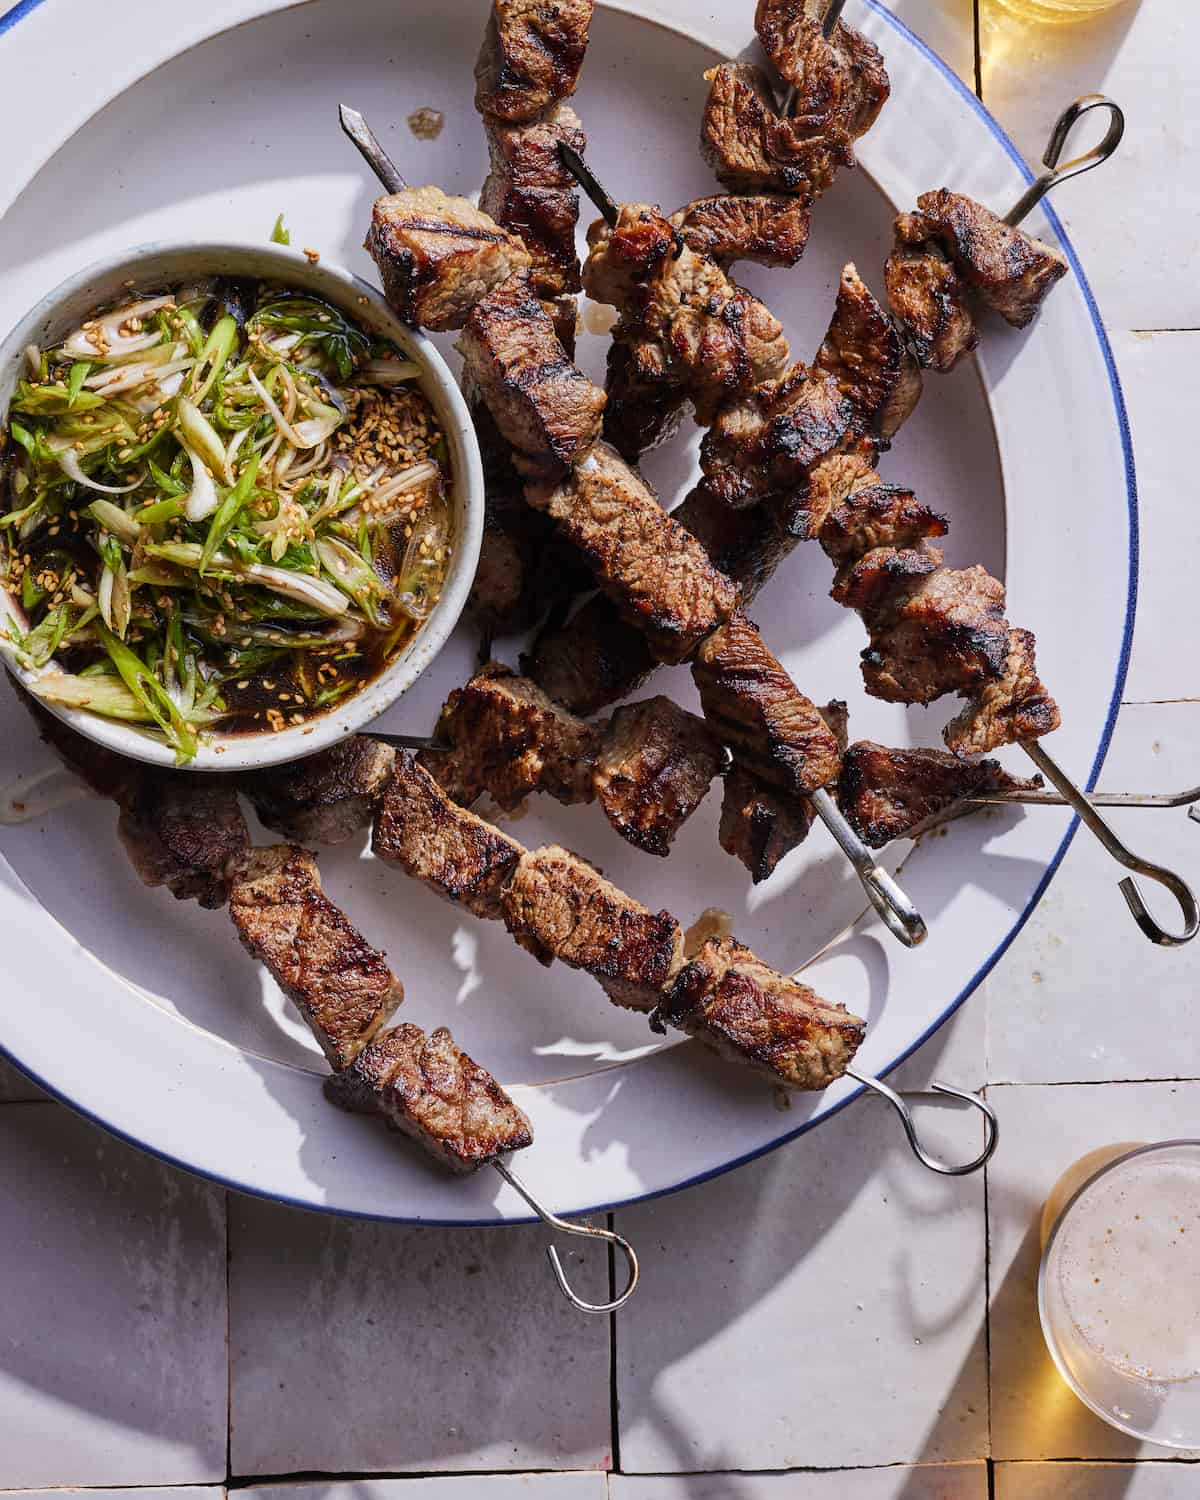 8 grilled steak skewers on a large white circle serving plate and a small bowl of scallion dipping sauce nestled between the skewers on the plate.